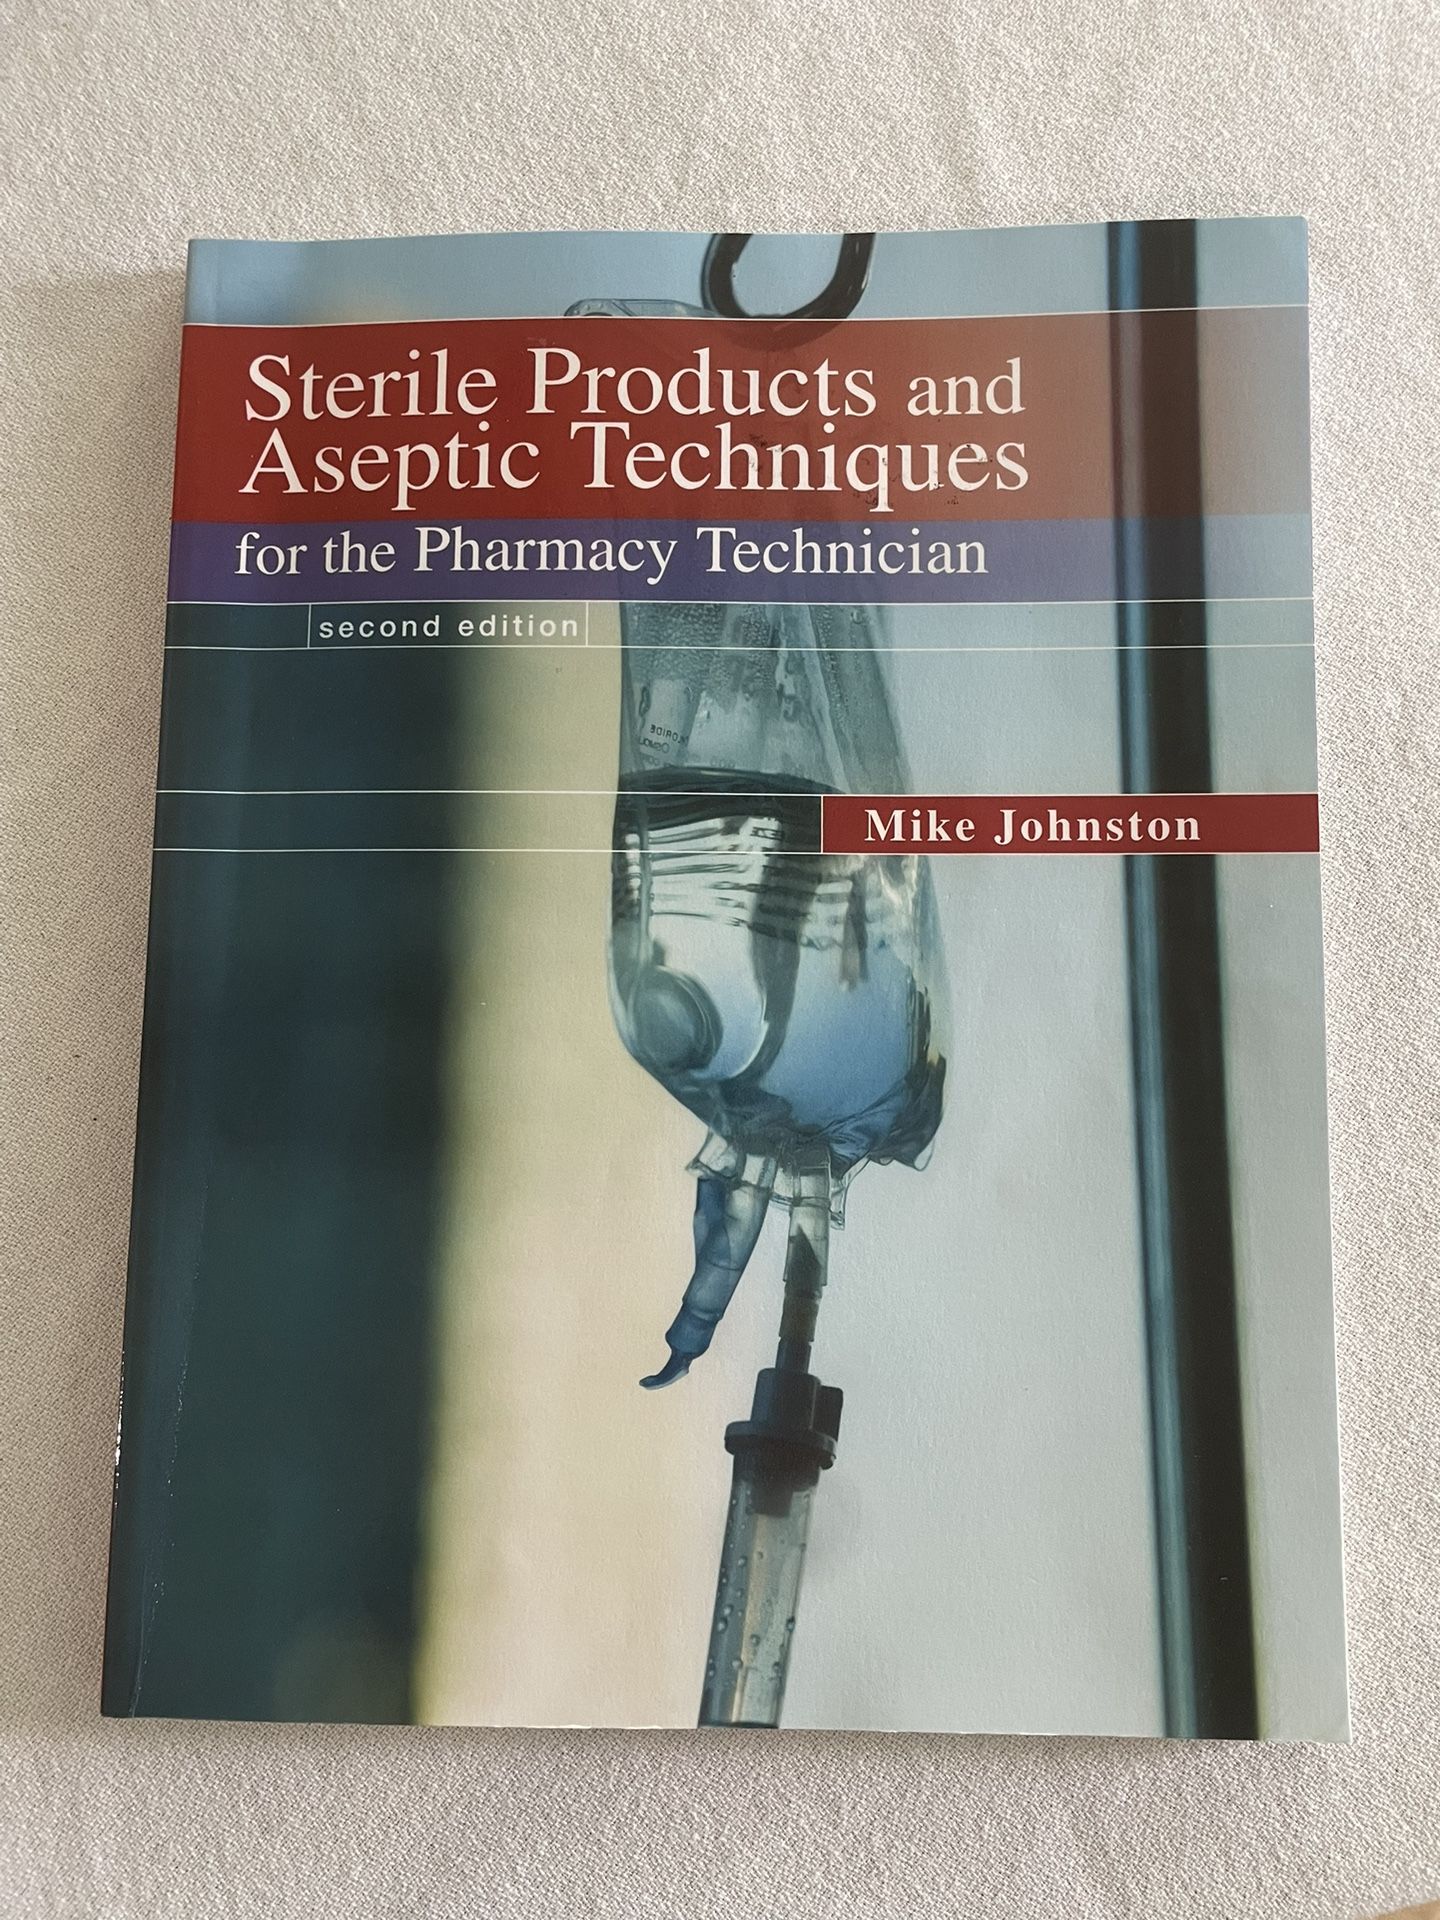 Sterile Products and Aseptic Techniques